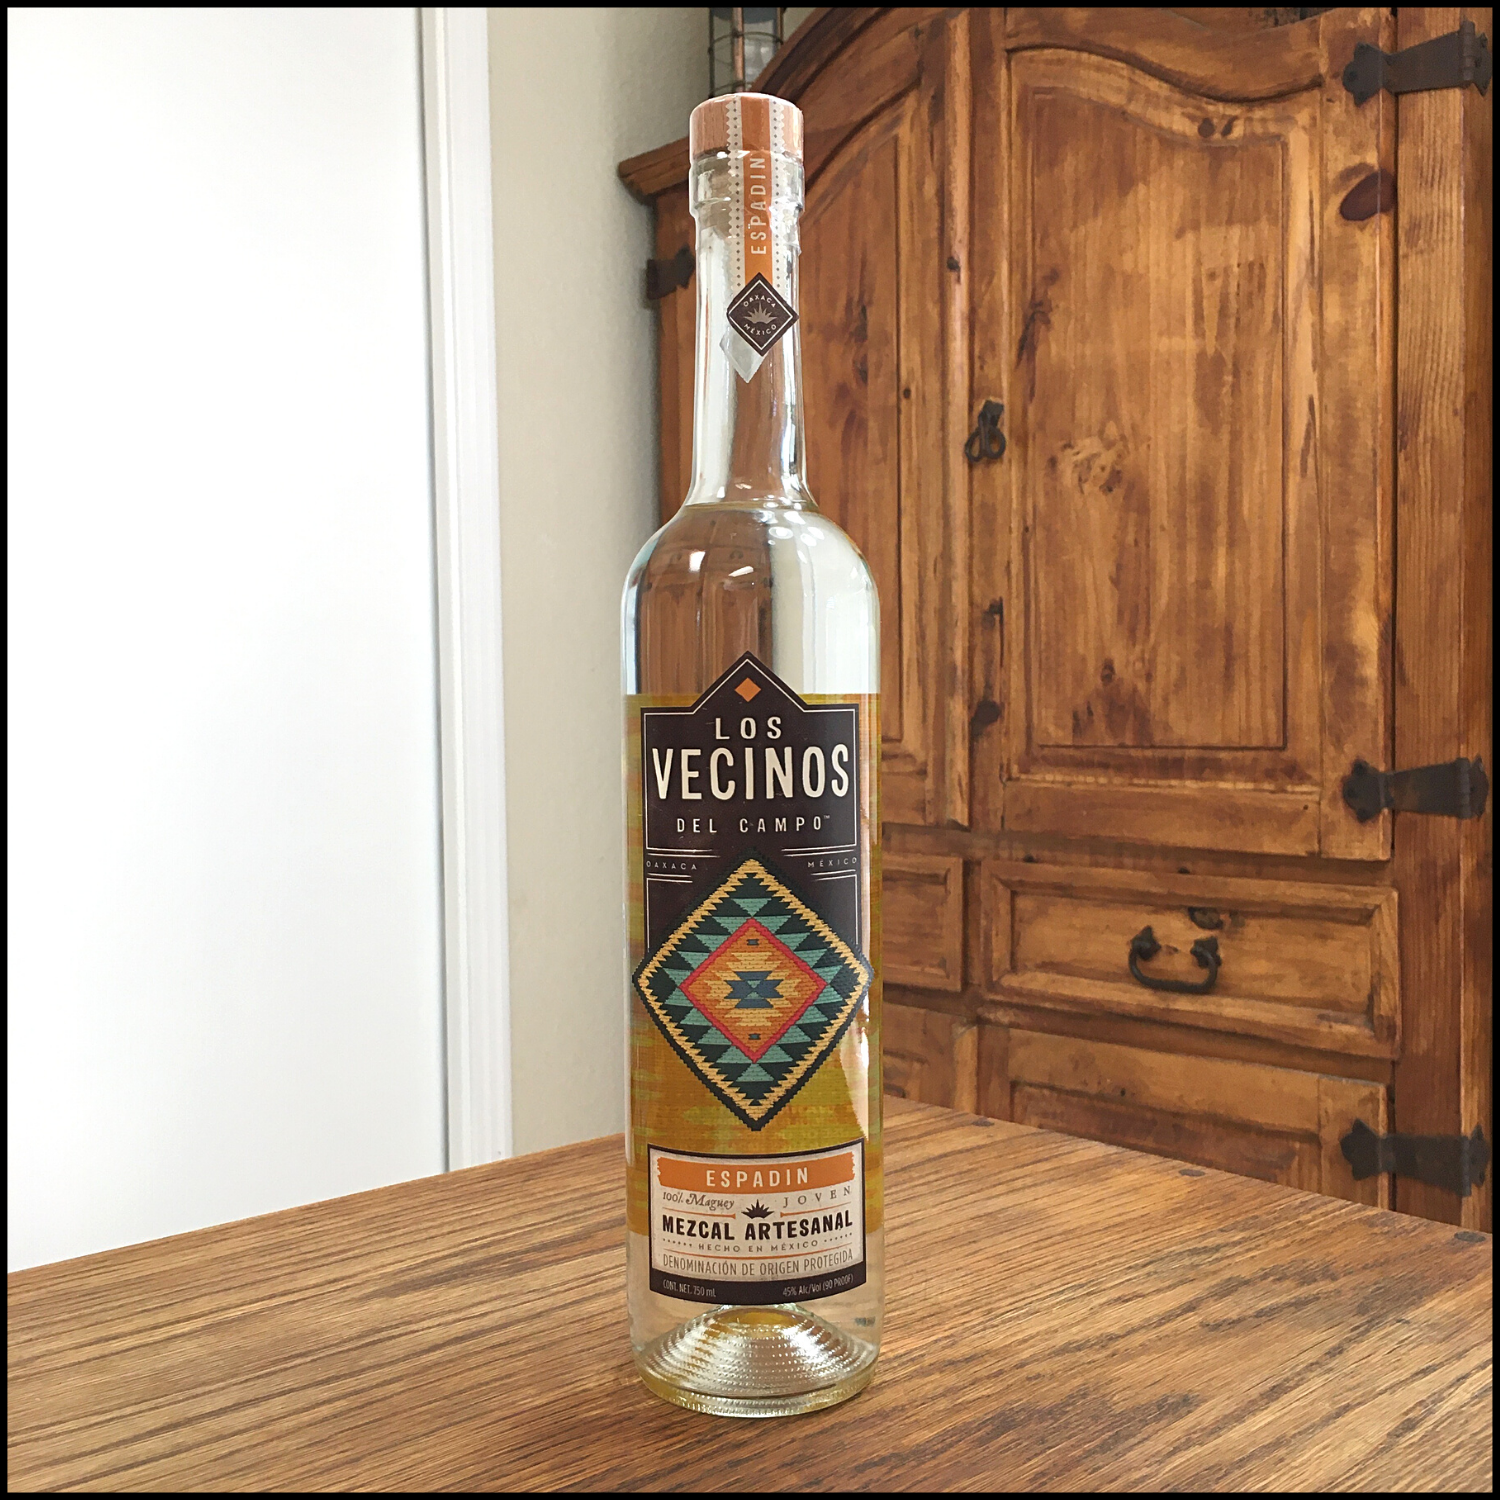 Bottle of clear-colored Los Vecinos del Campo Mezcal sitting on a wooden table, in front of a mixed white and wooden background